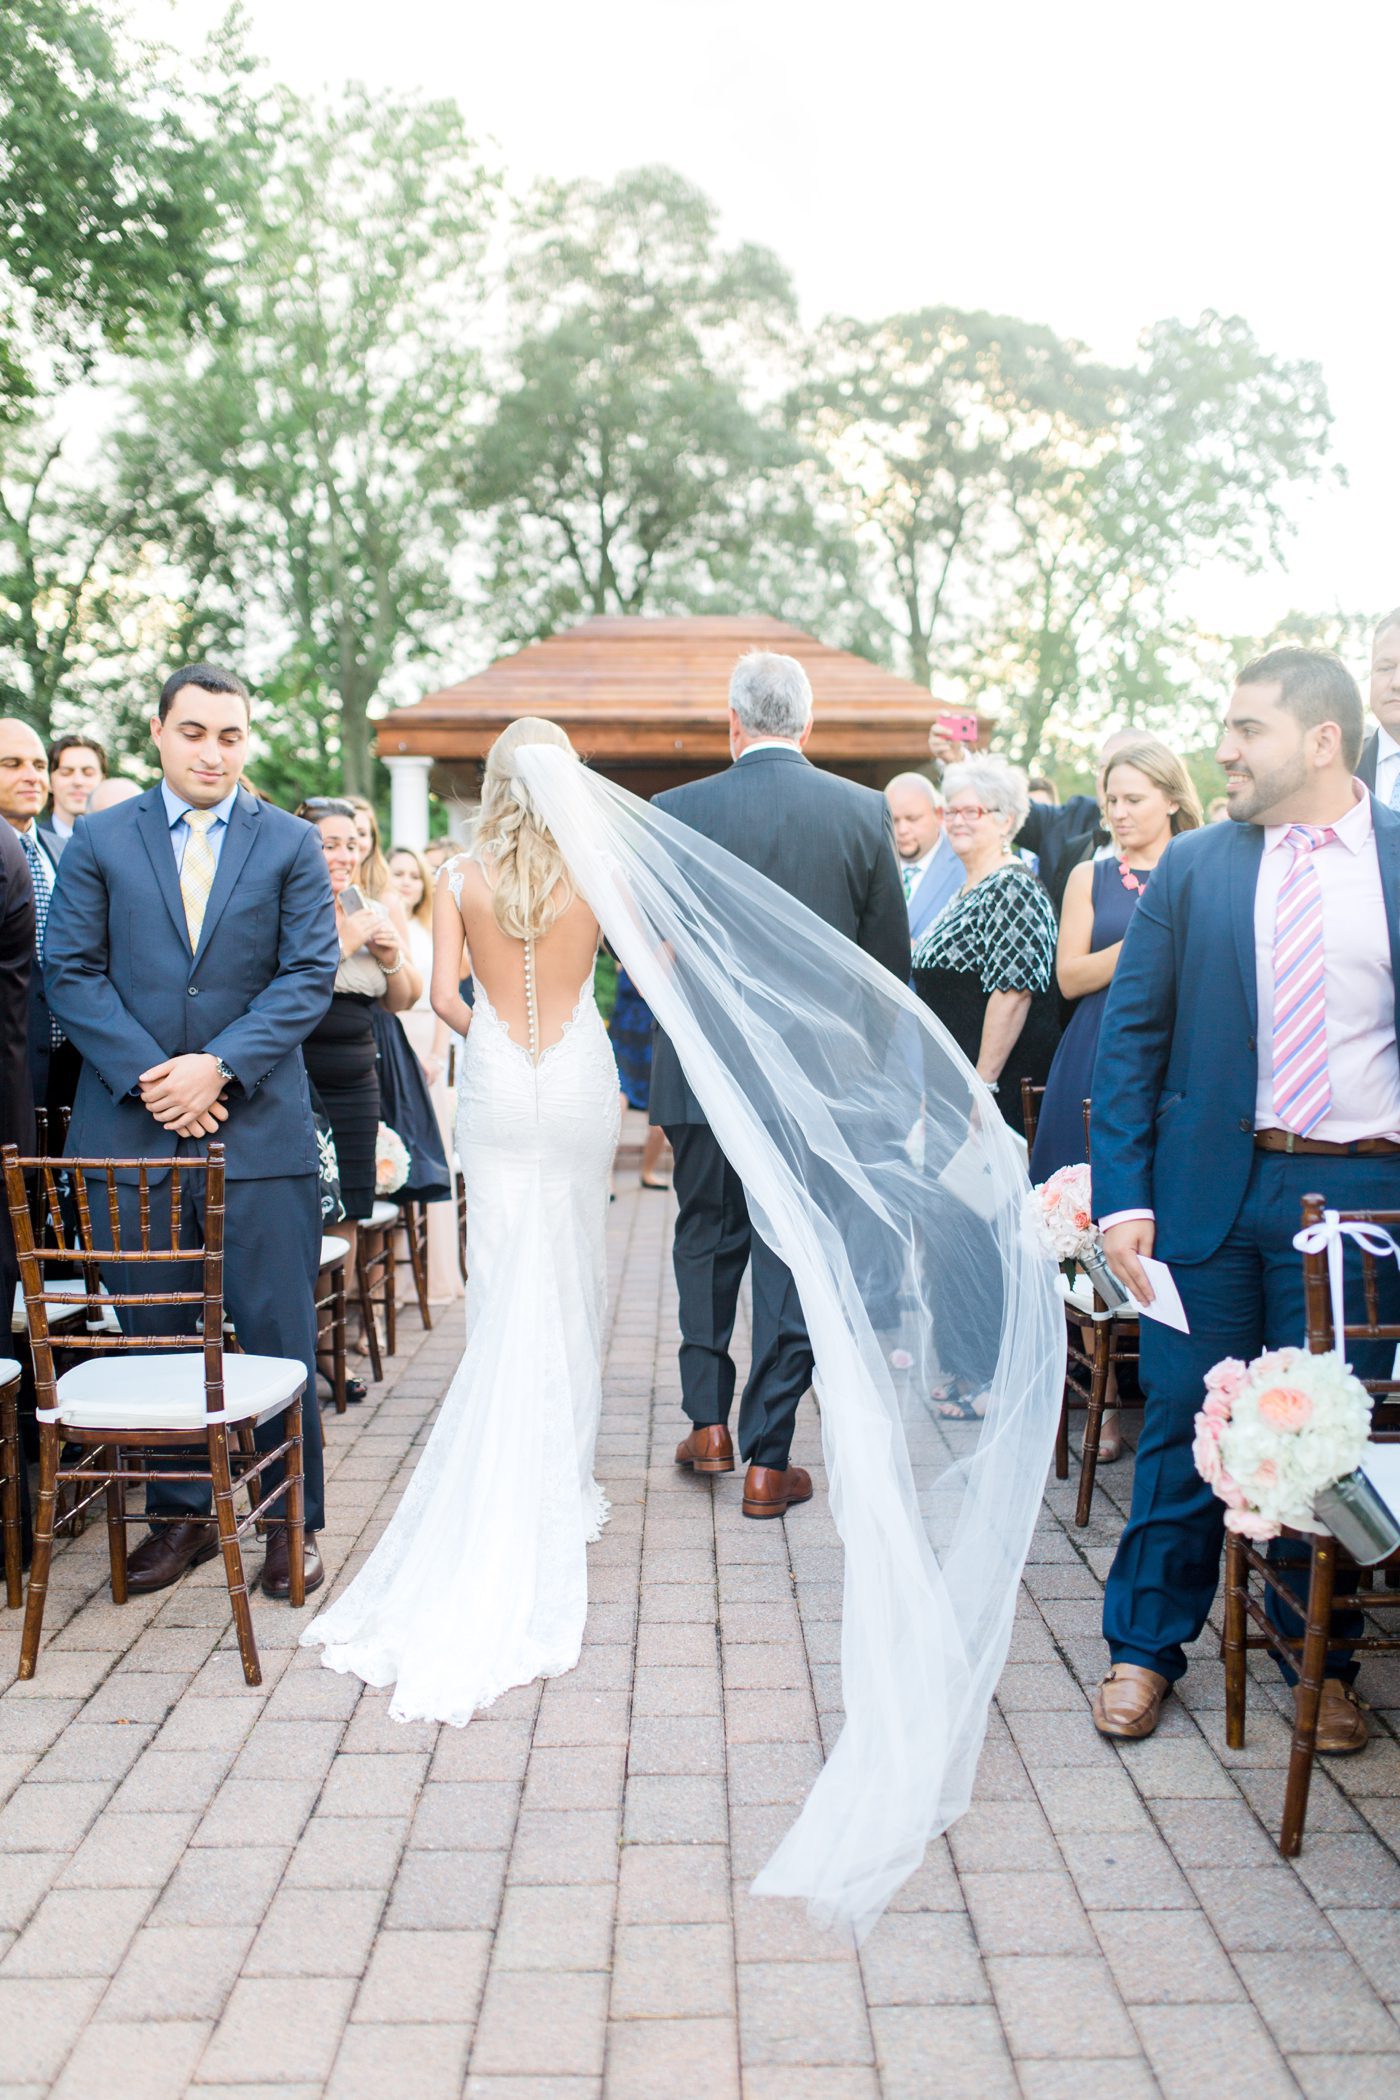 Brides veil flying in the wind as she walks down the aisle 